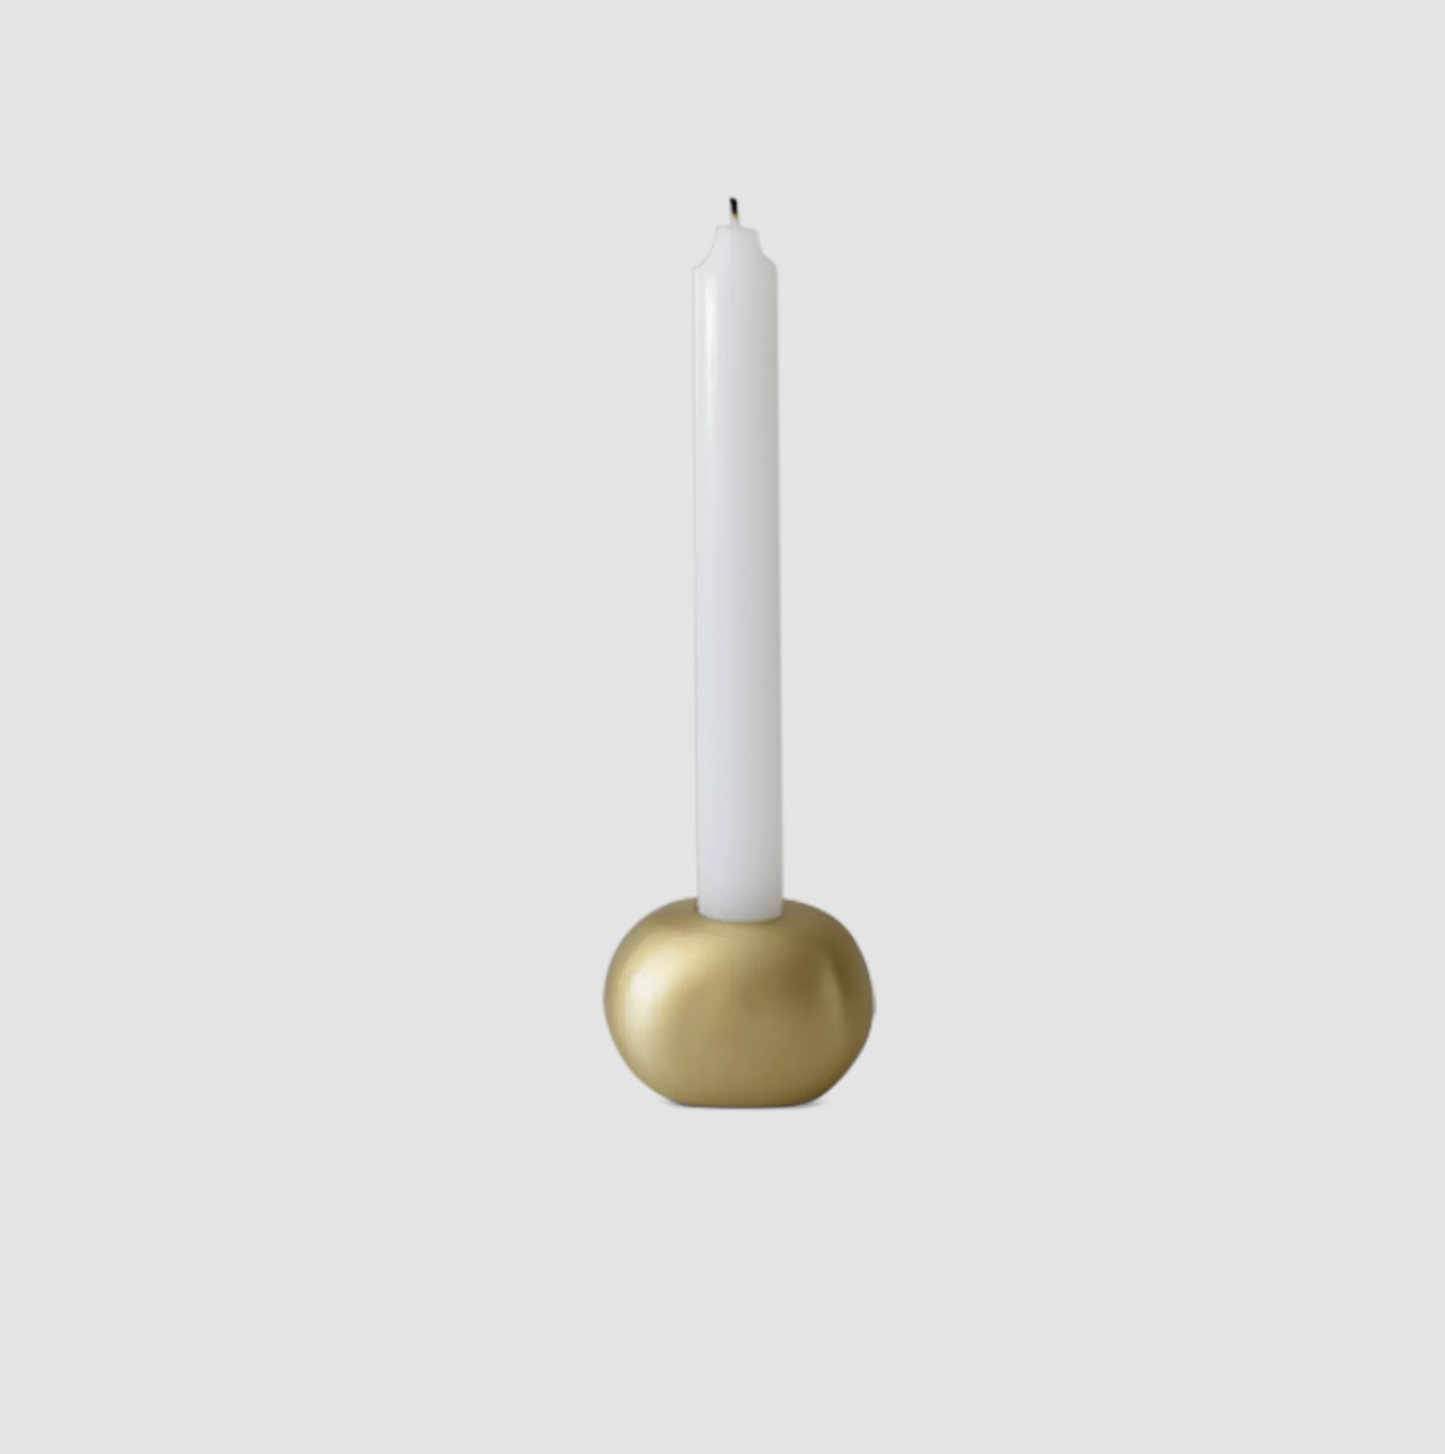 NOODLE Solo Candle Holder in Brushed Brass